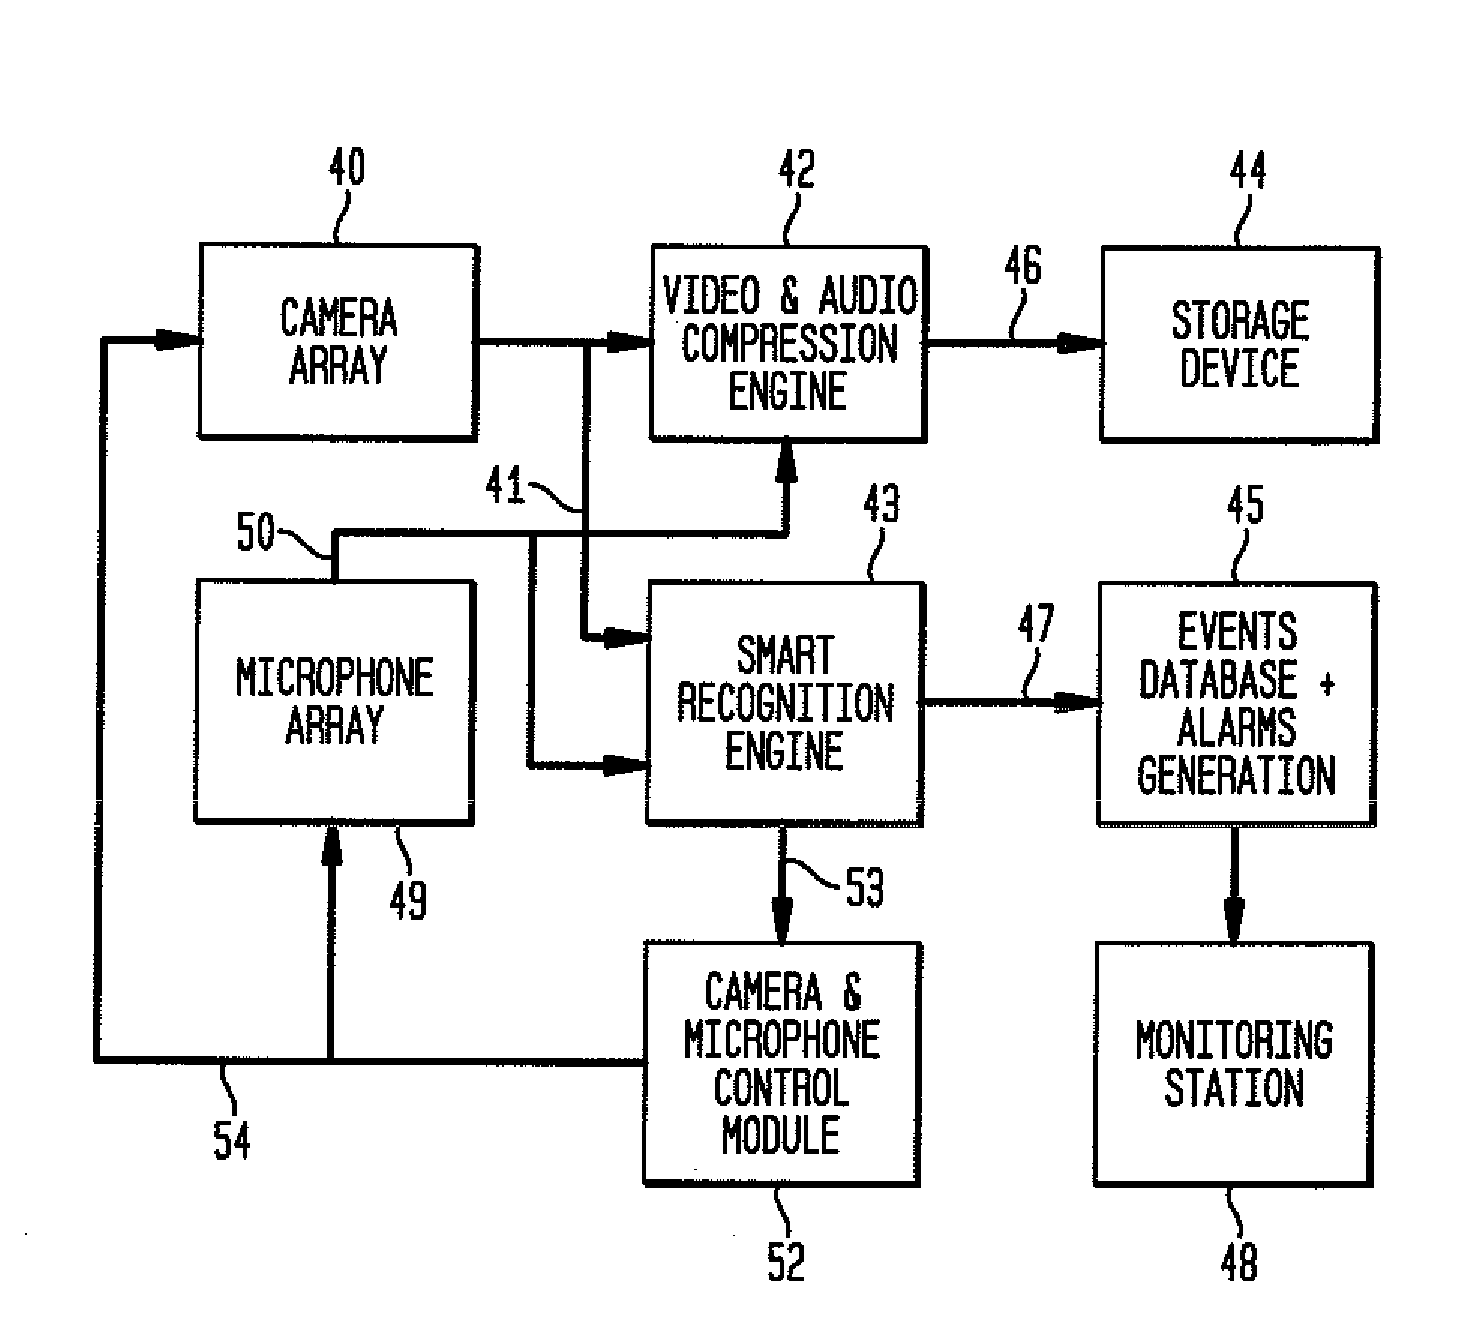 Video surveillance system and method with combined video and audio recognition